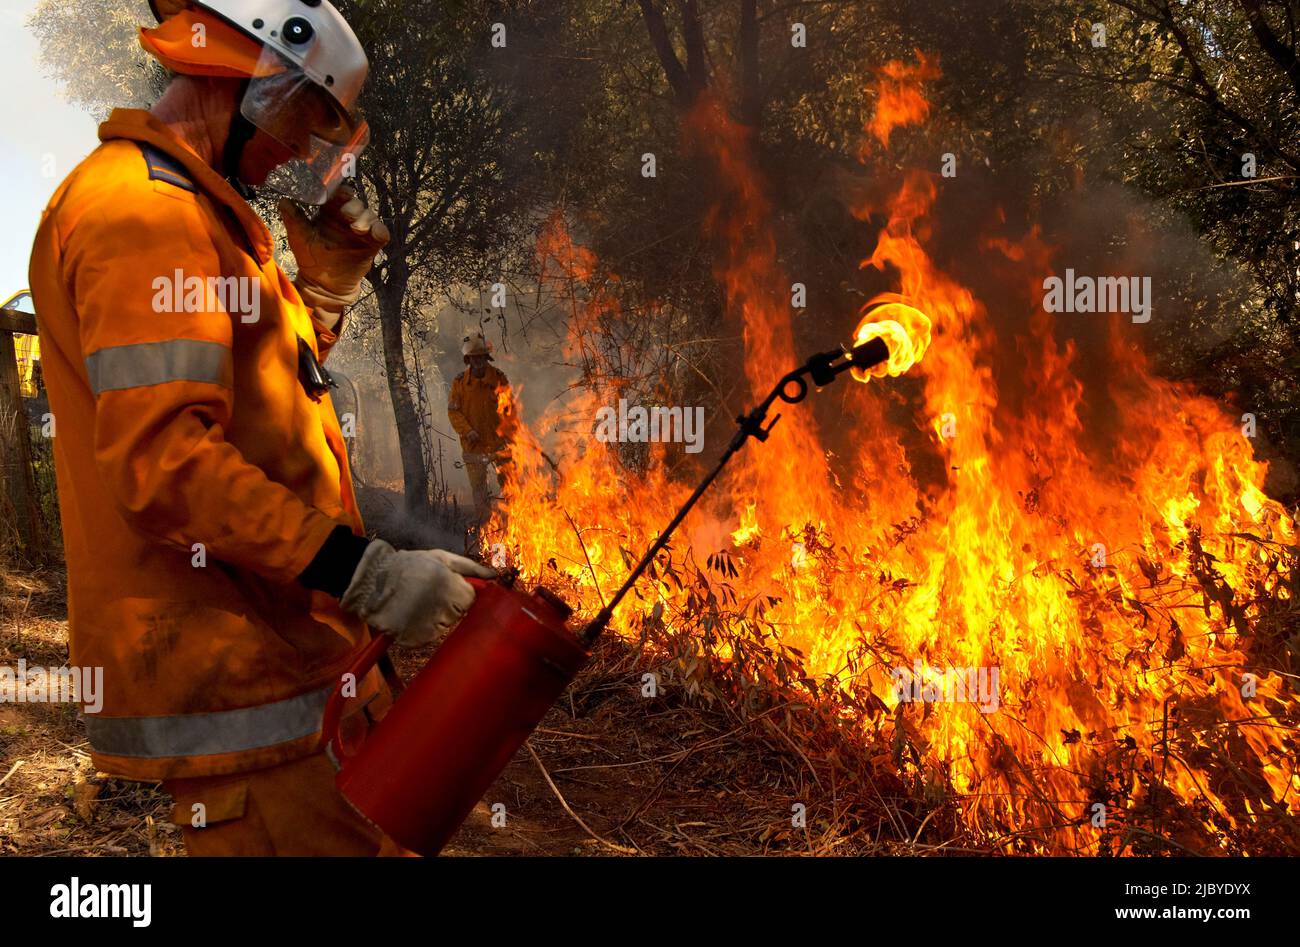 Fireman in protective clothing back burning forest floor Stock Photo